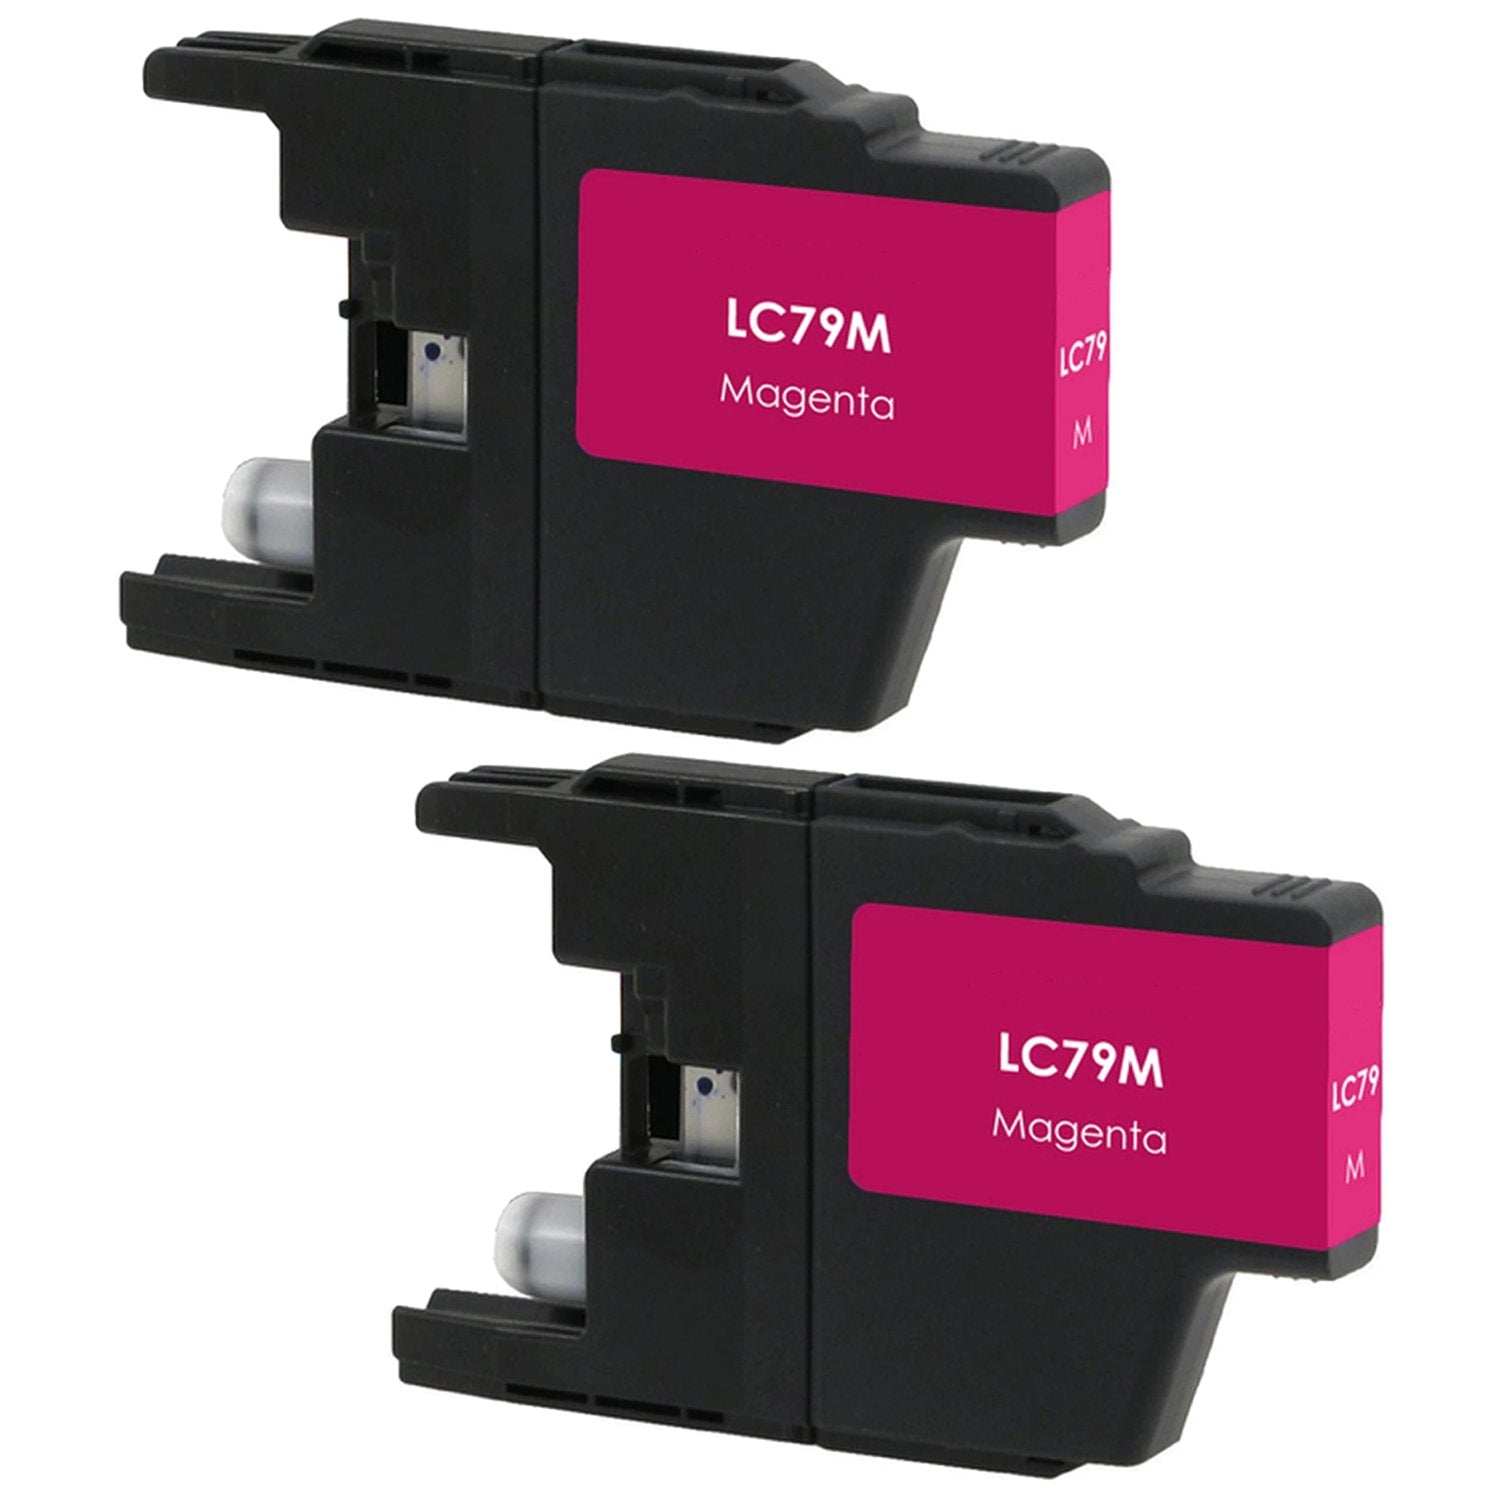 Absolute Toner Compatible Brother LC79 Magenta Extra High Yield Ink Cartridge, LC79M | Absolute Toner Brother Ink Cartridges